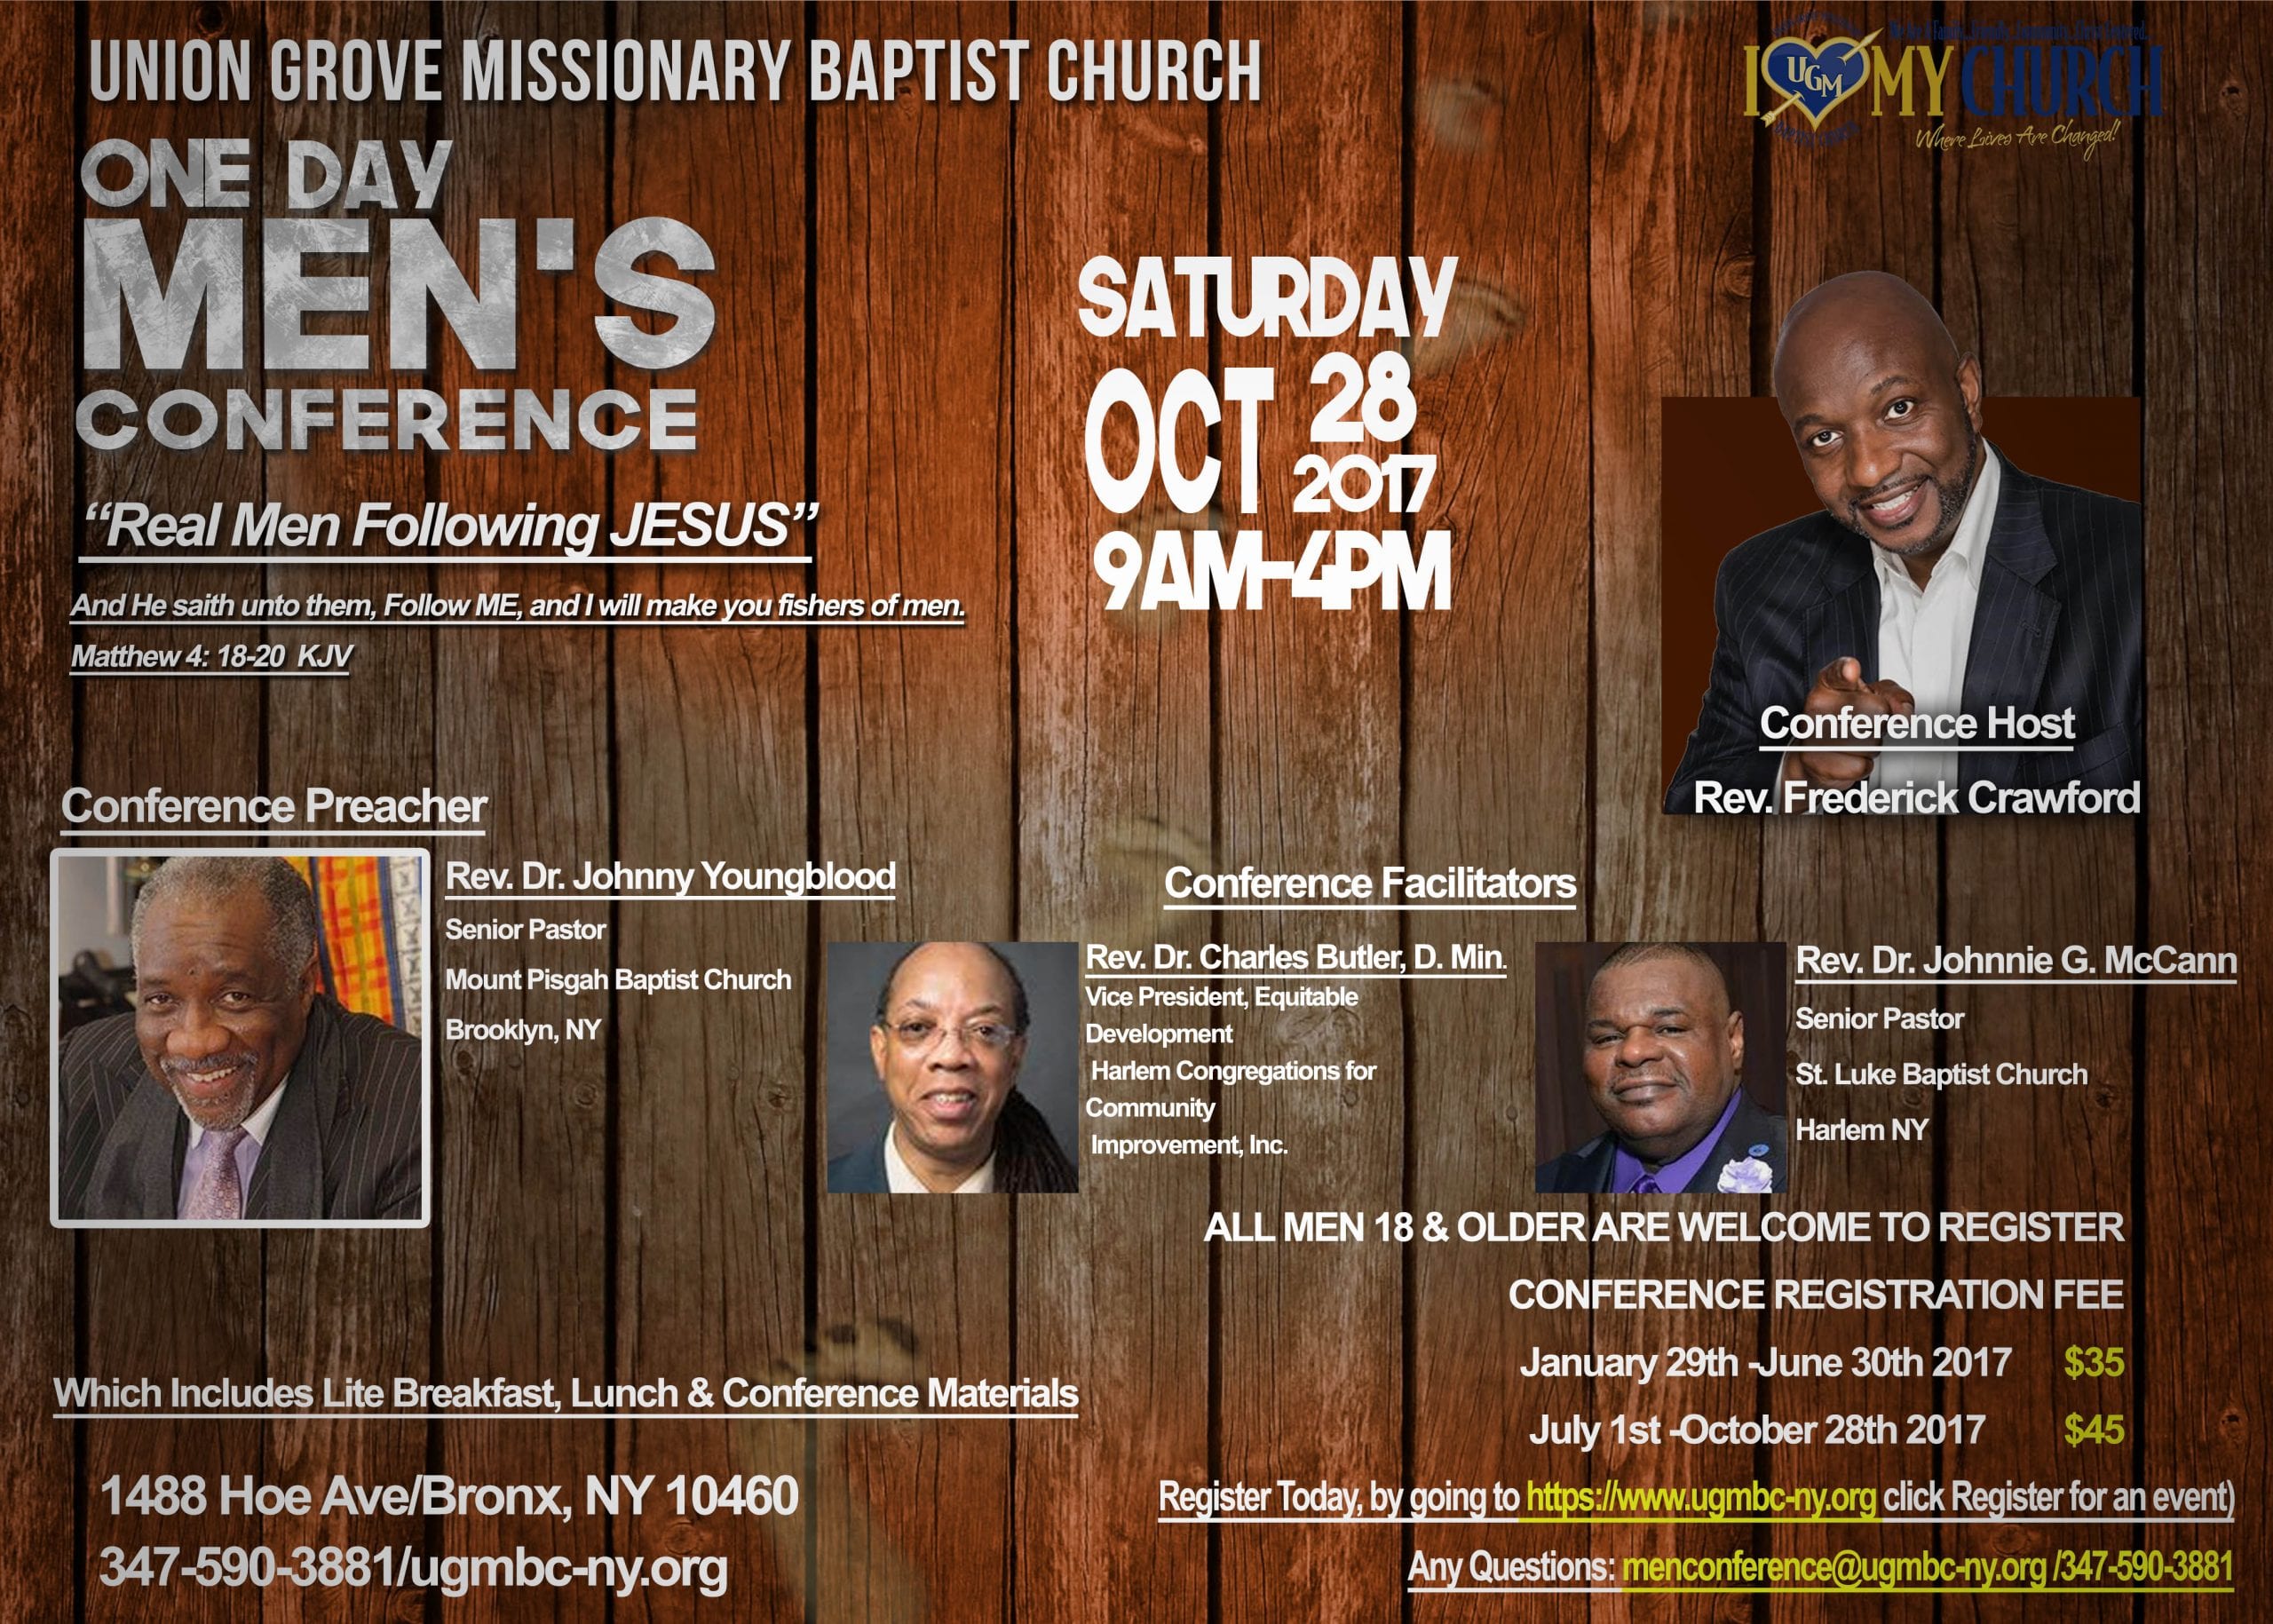 UGMBC One Day Men's Conference - Union Grove Missionary Baptist Church